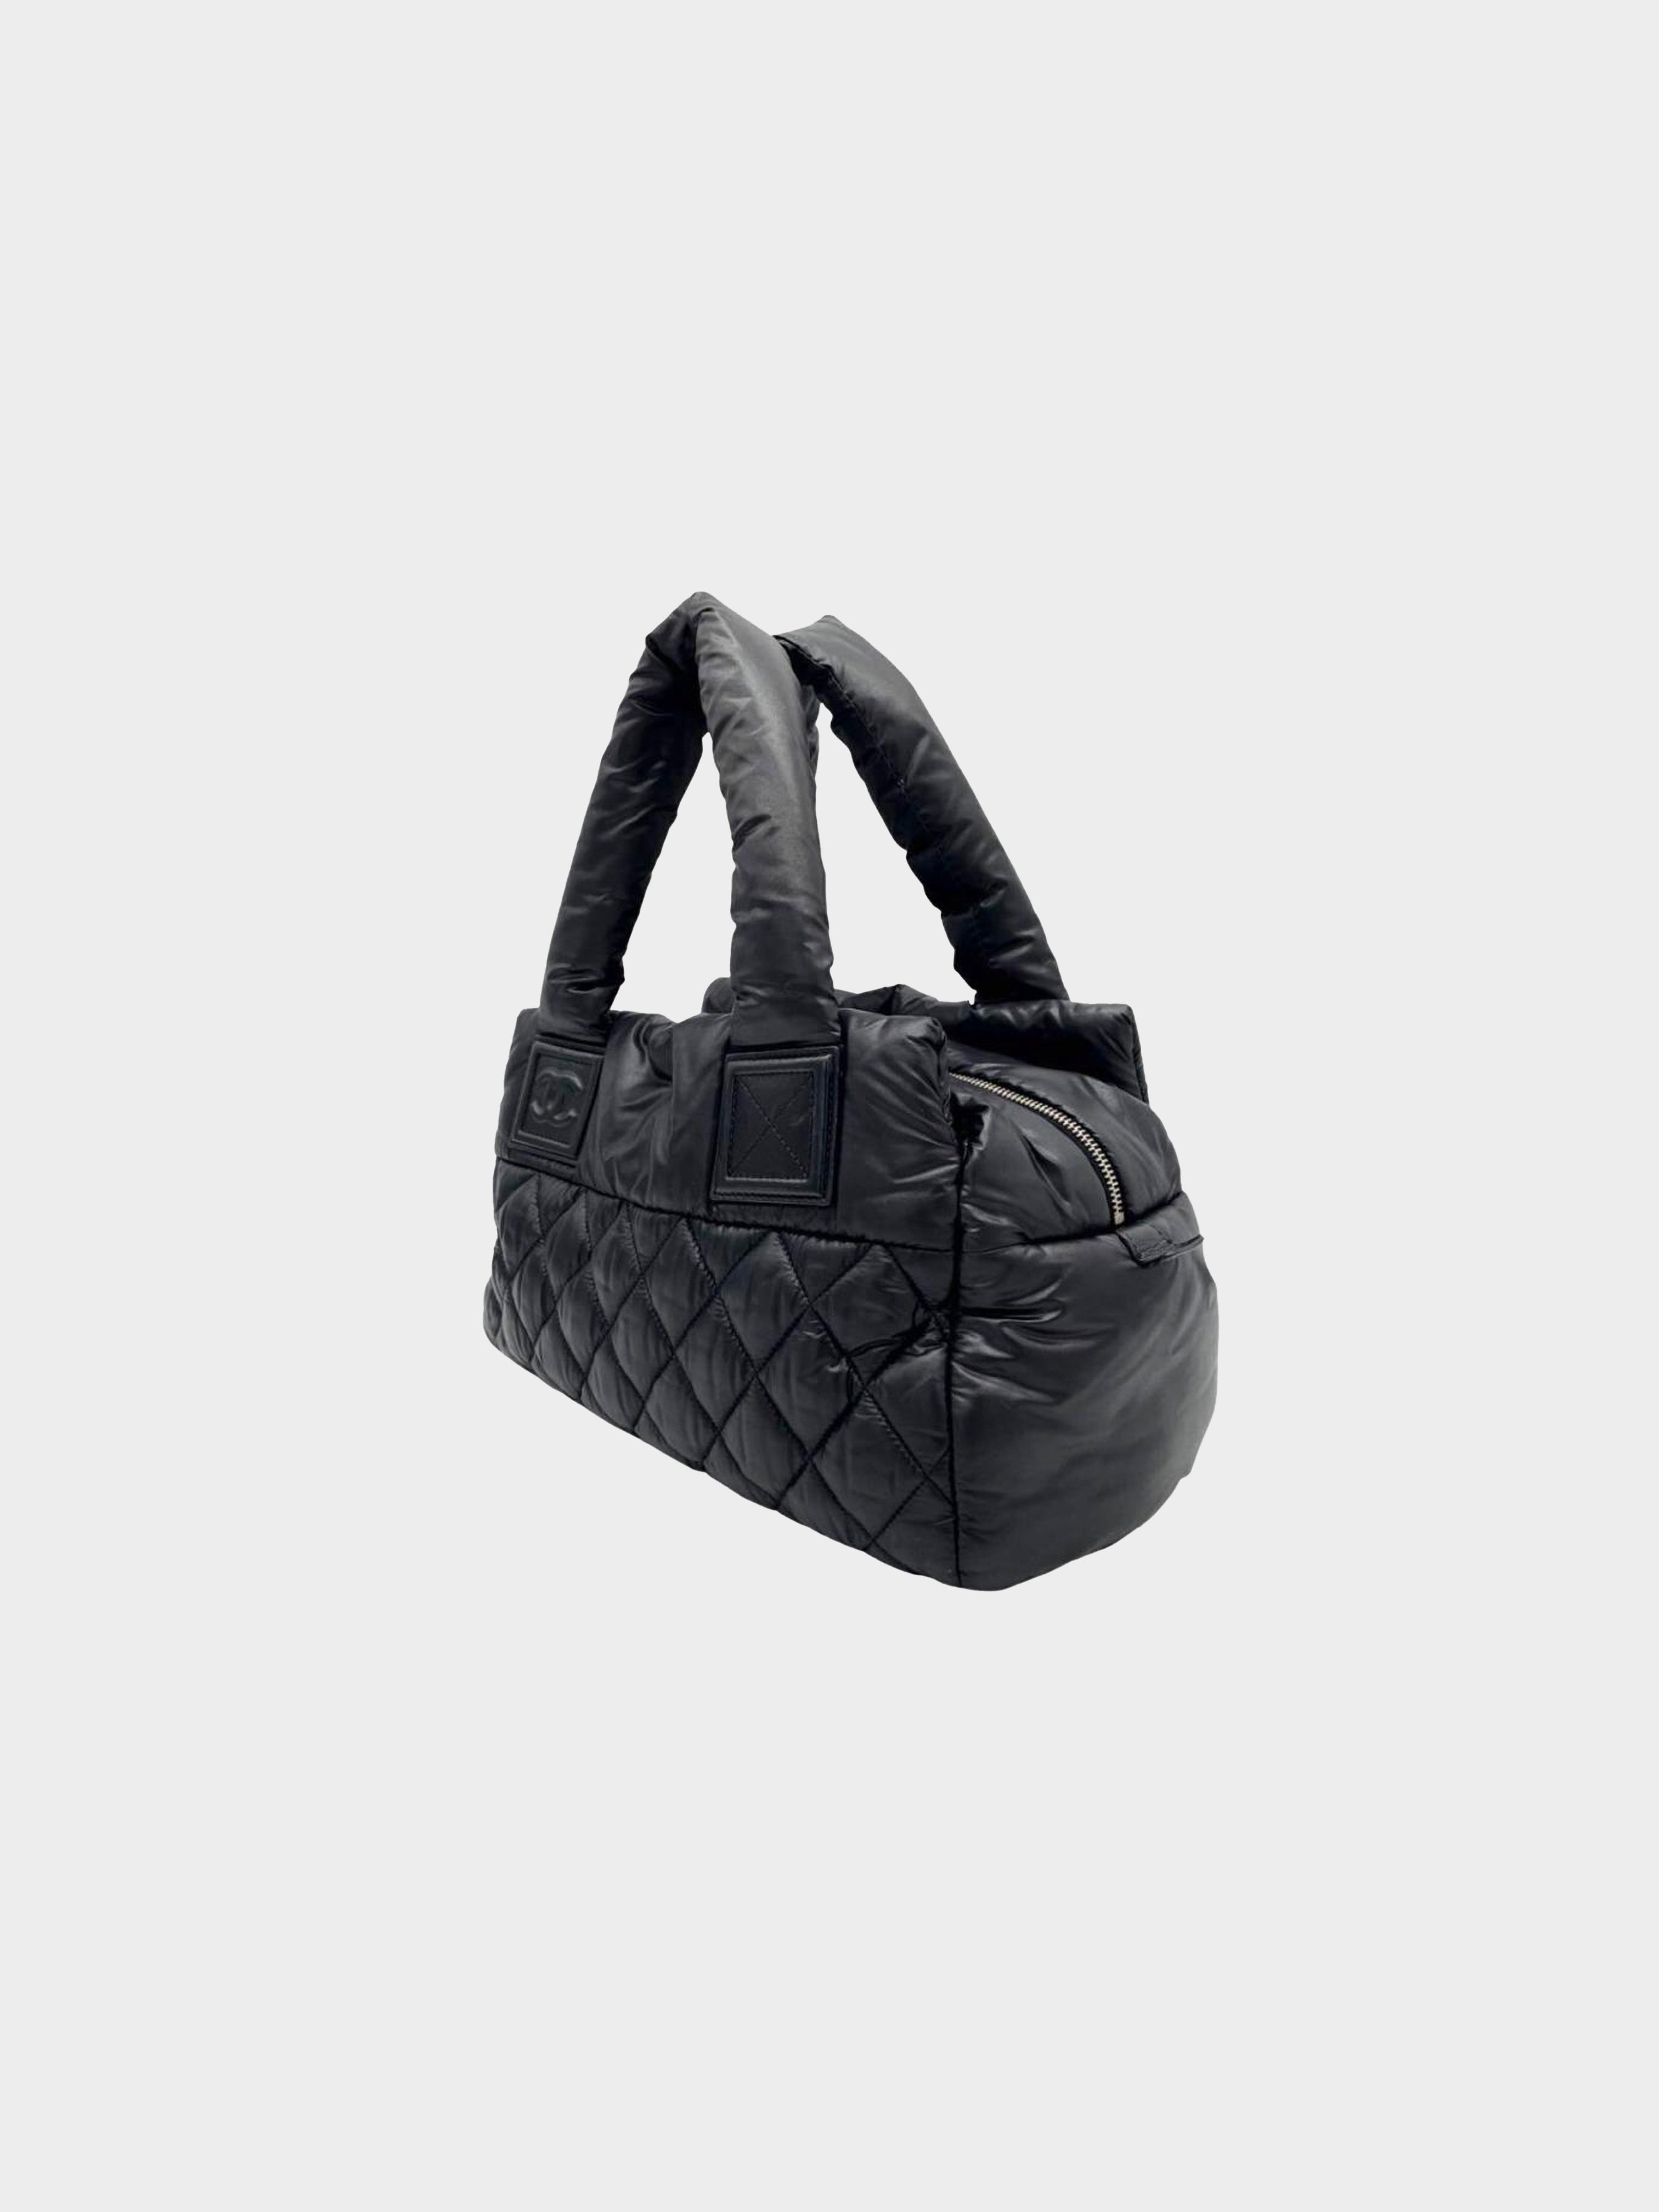 chanel cocoon tote